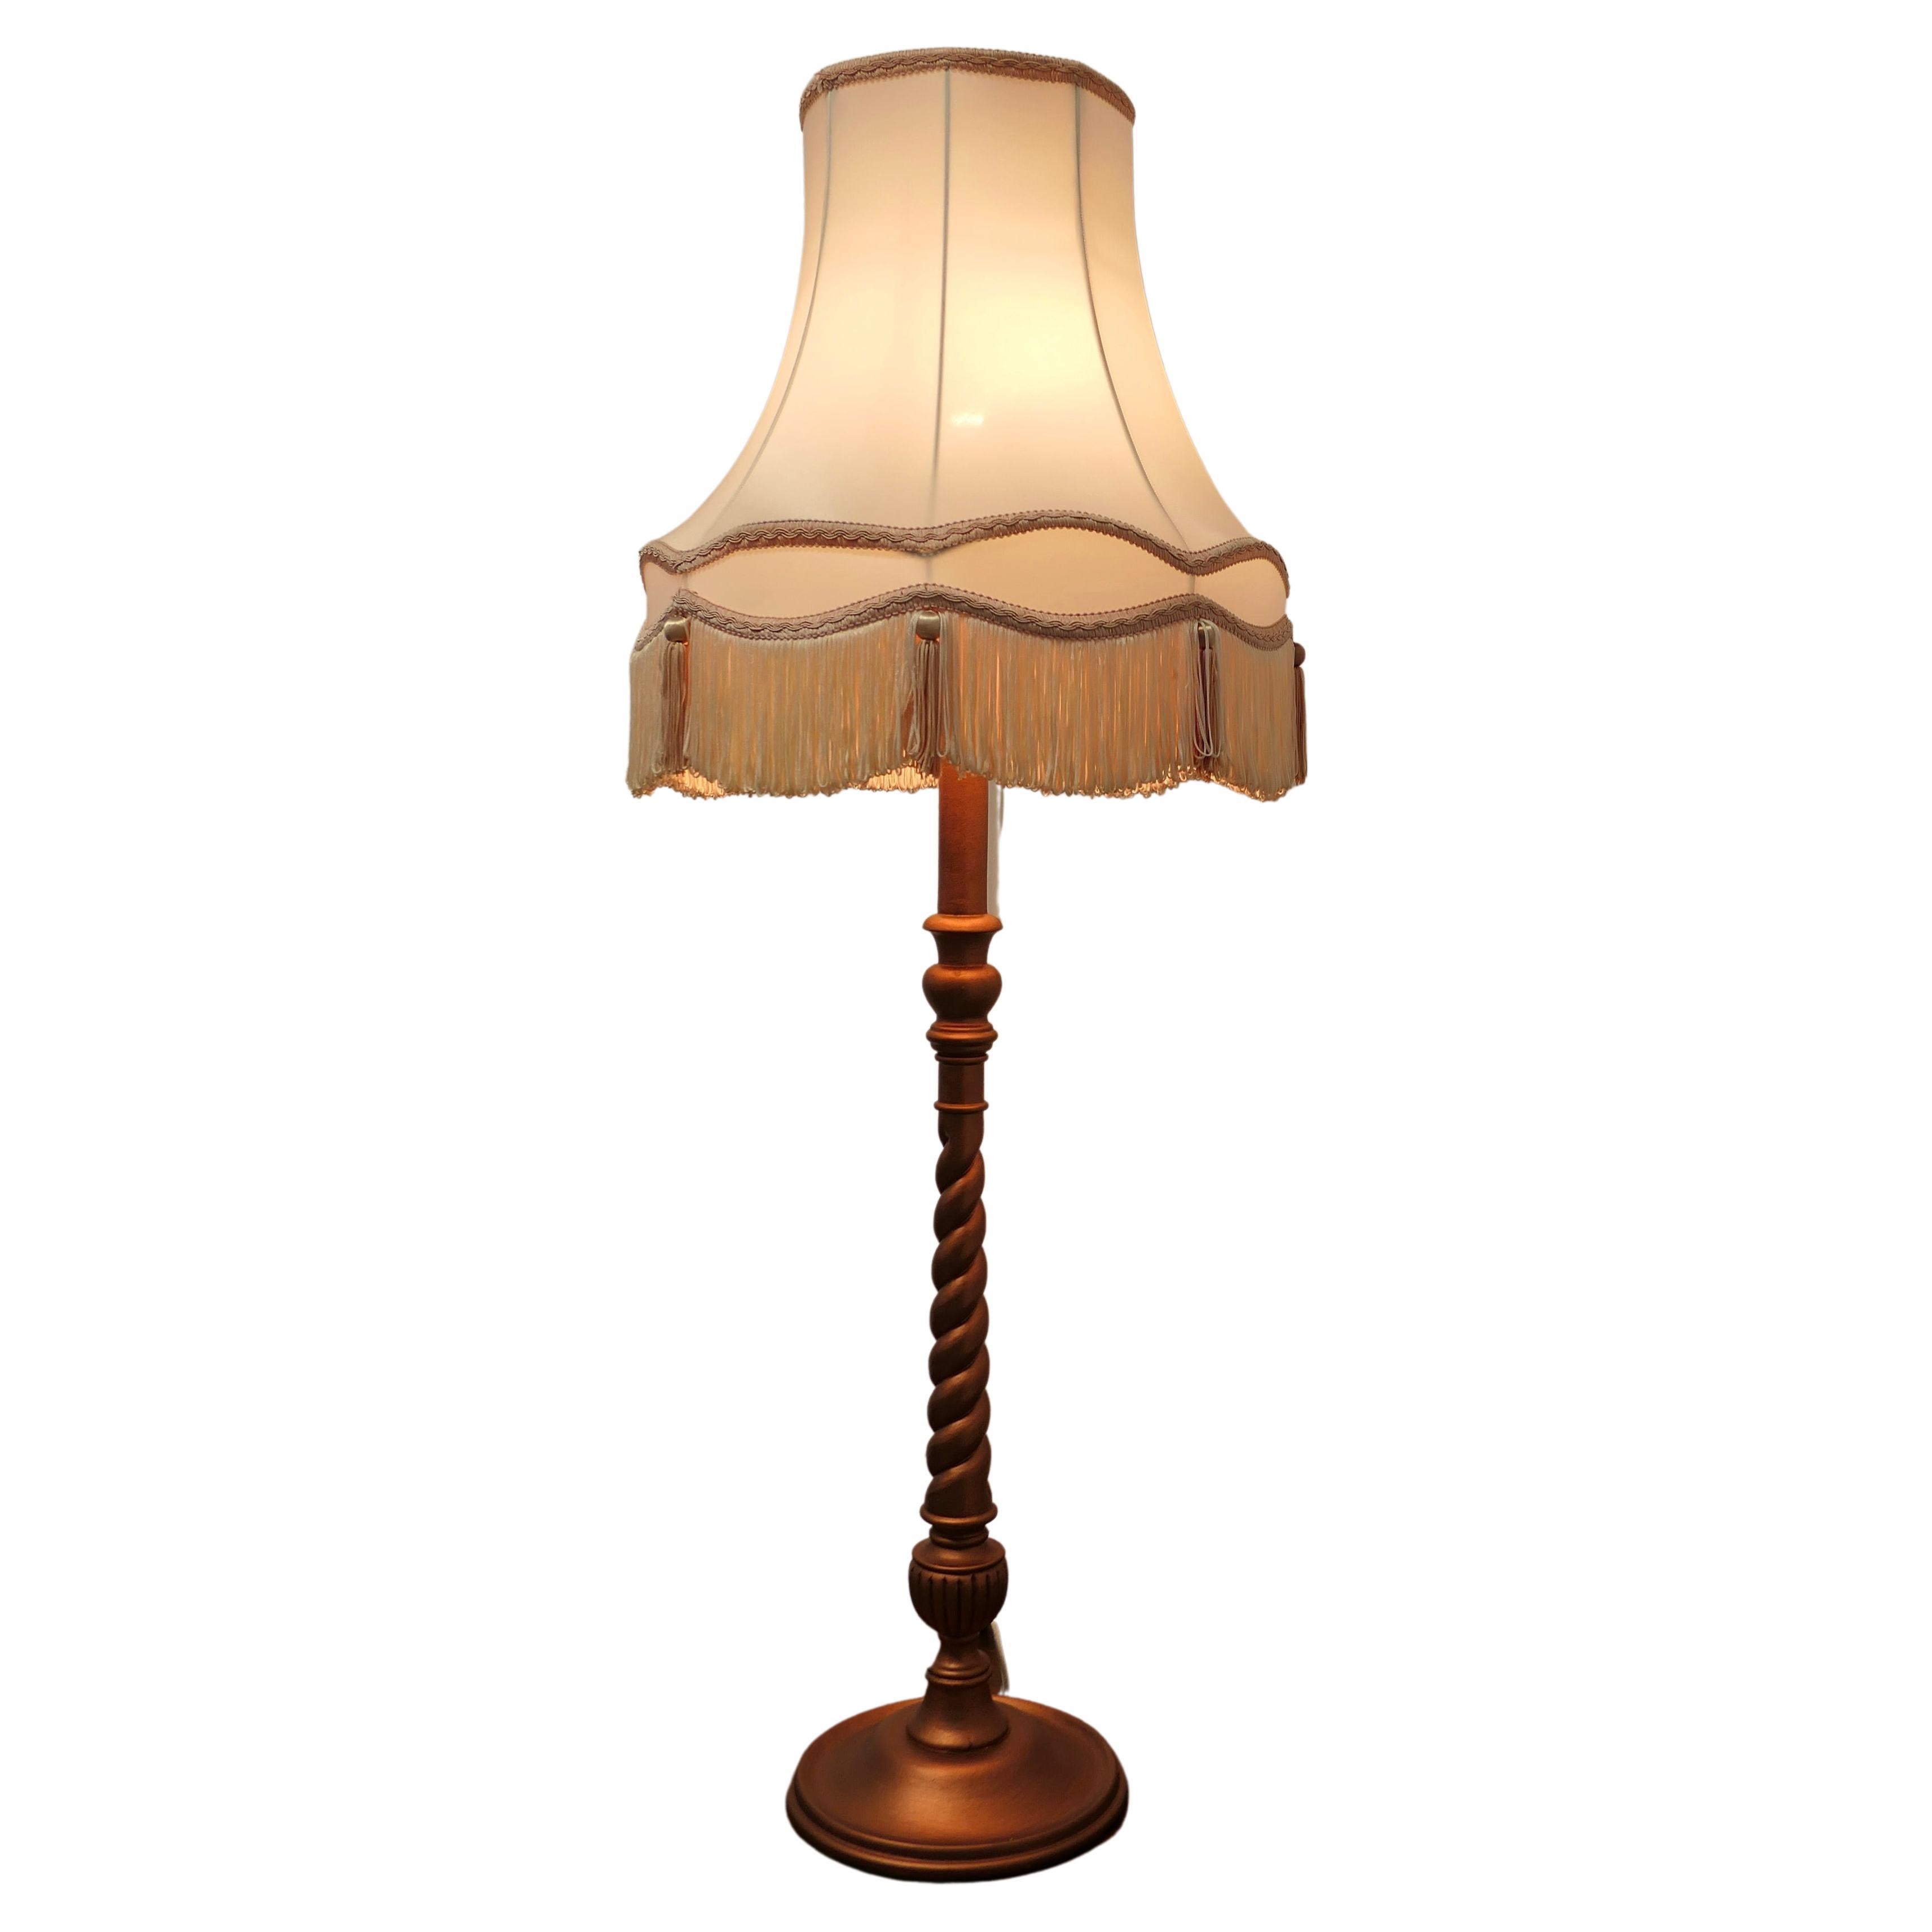 Arts and Crafts Style Half Standard Lamp This Is a Very Attractive Piece